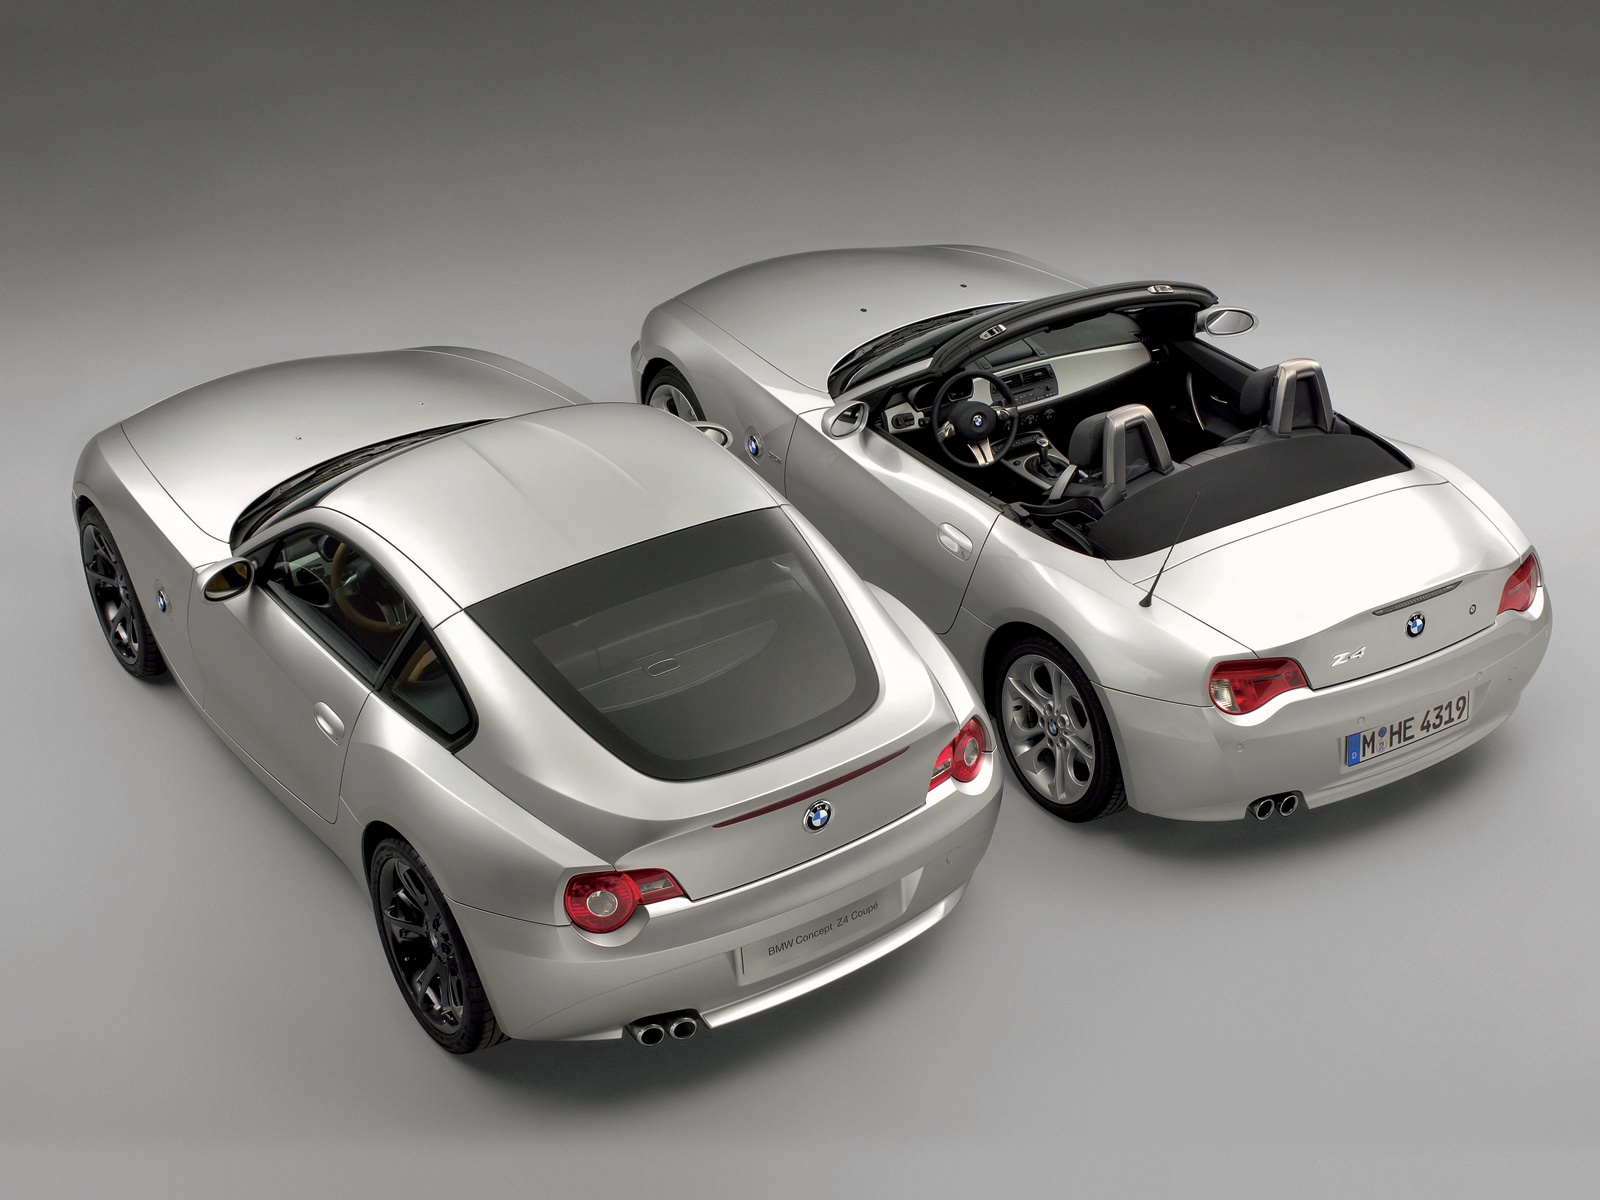 On this page we present you the most successful photo gallery of BMW Z4 Coup